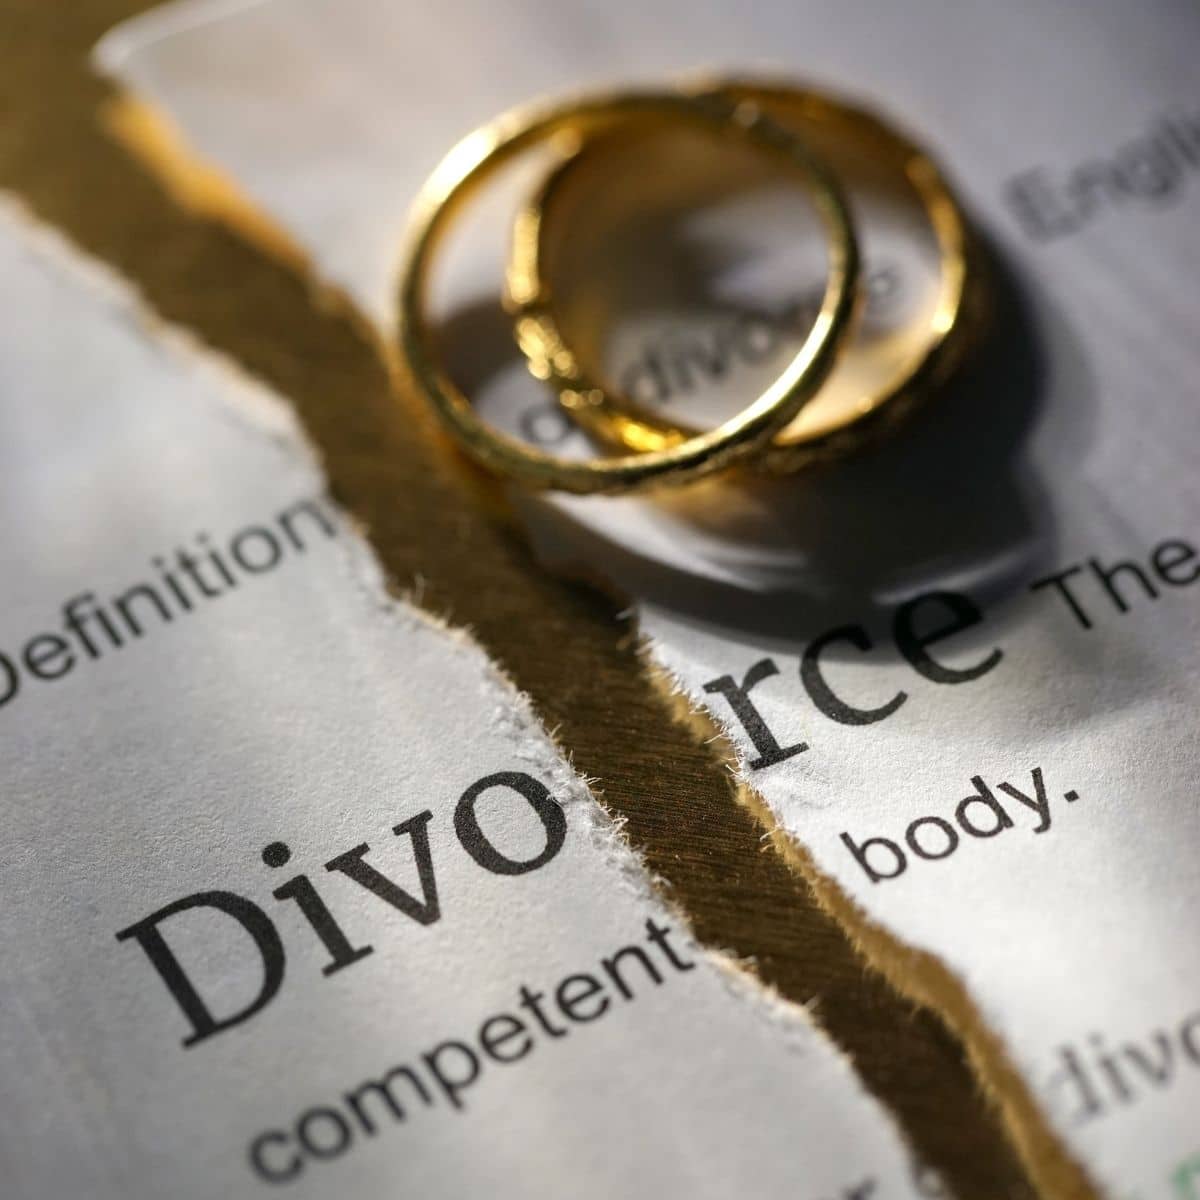 An image of divorce papers with gold wedding bands laying on top.